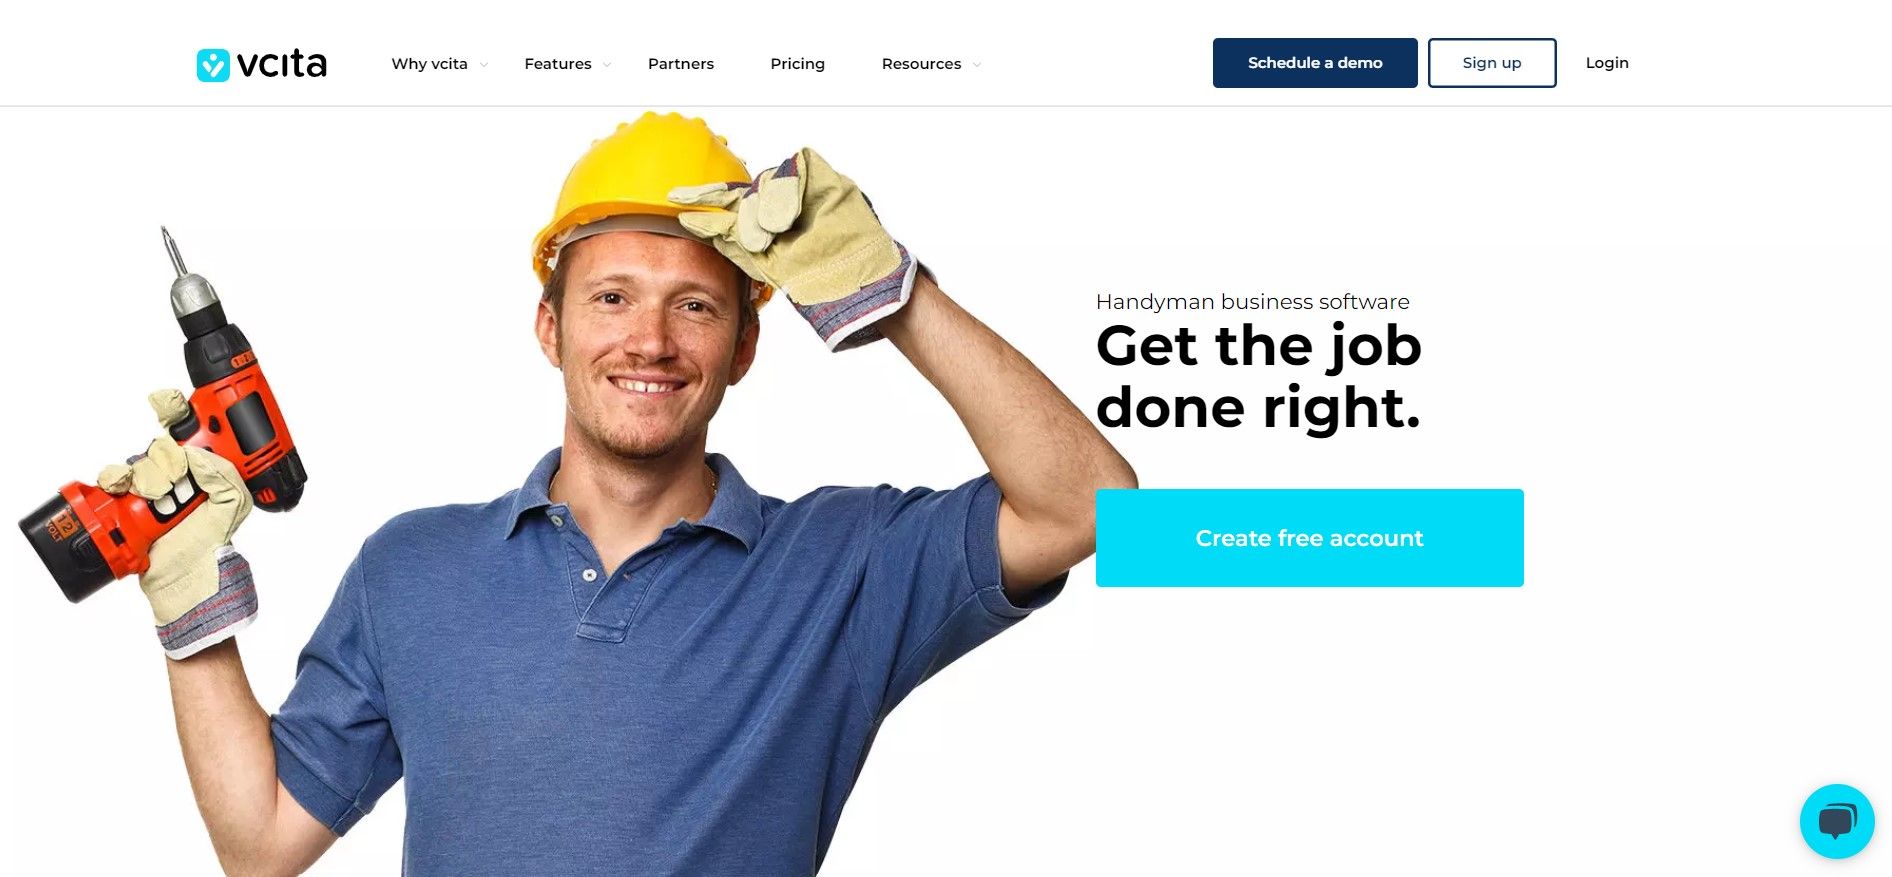 Vcita website page showing a handyman and saying 'get the job done right'